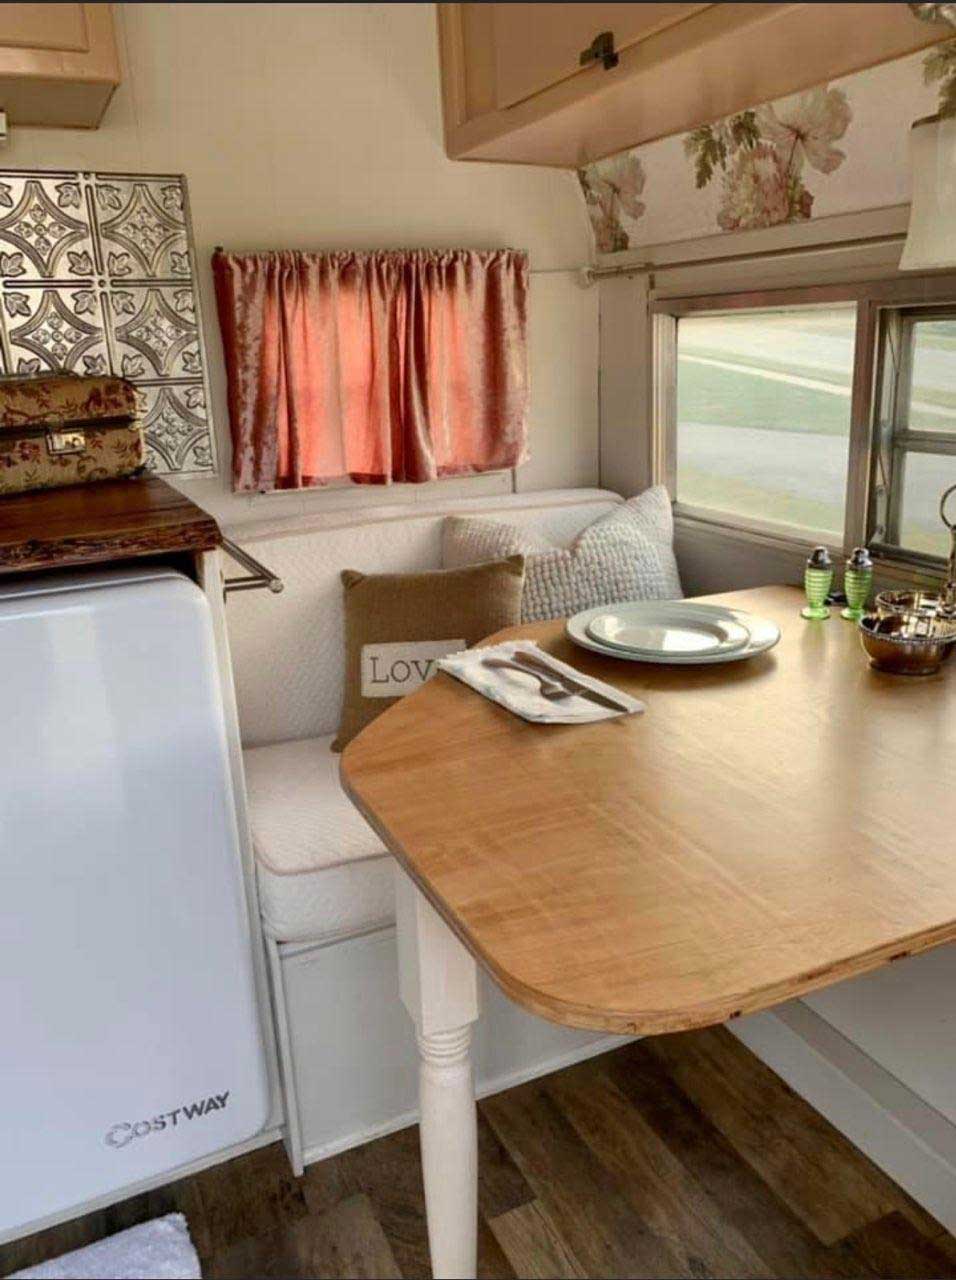 Writing Desk or Table in camper